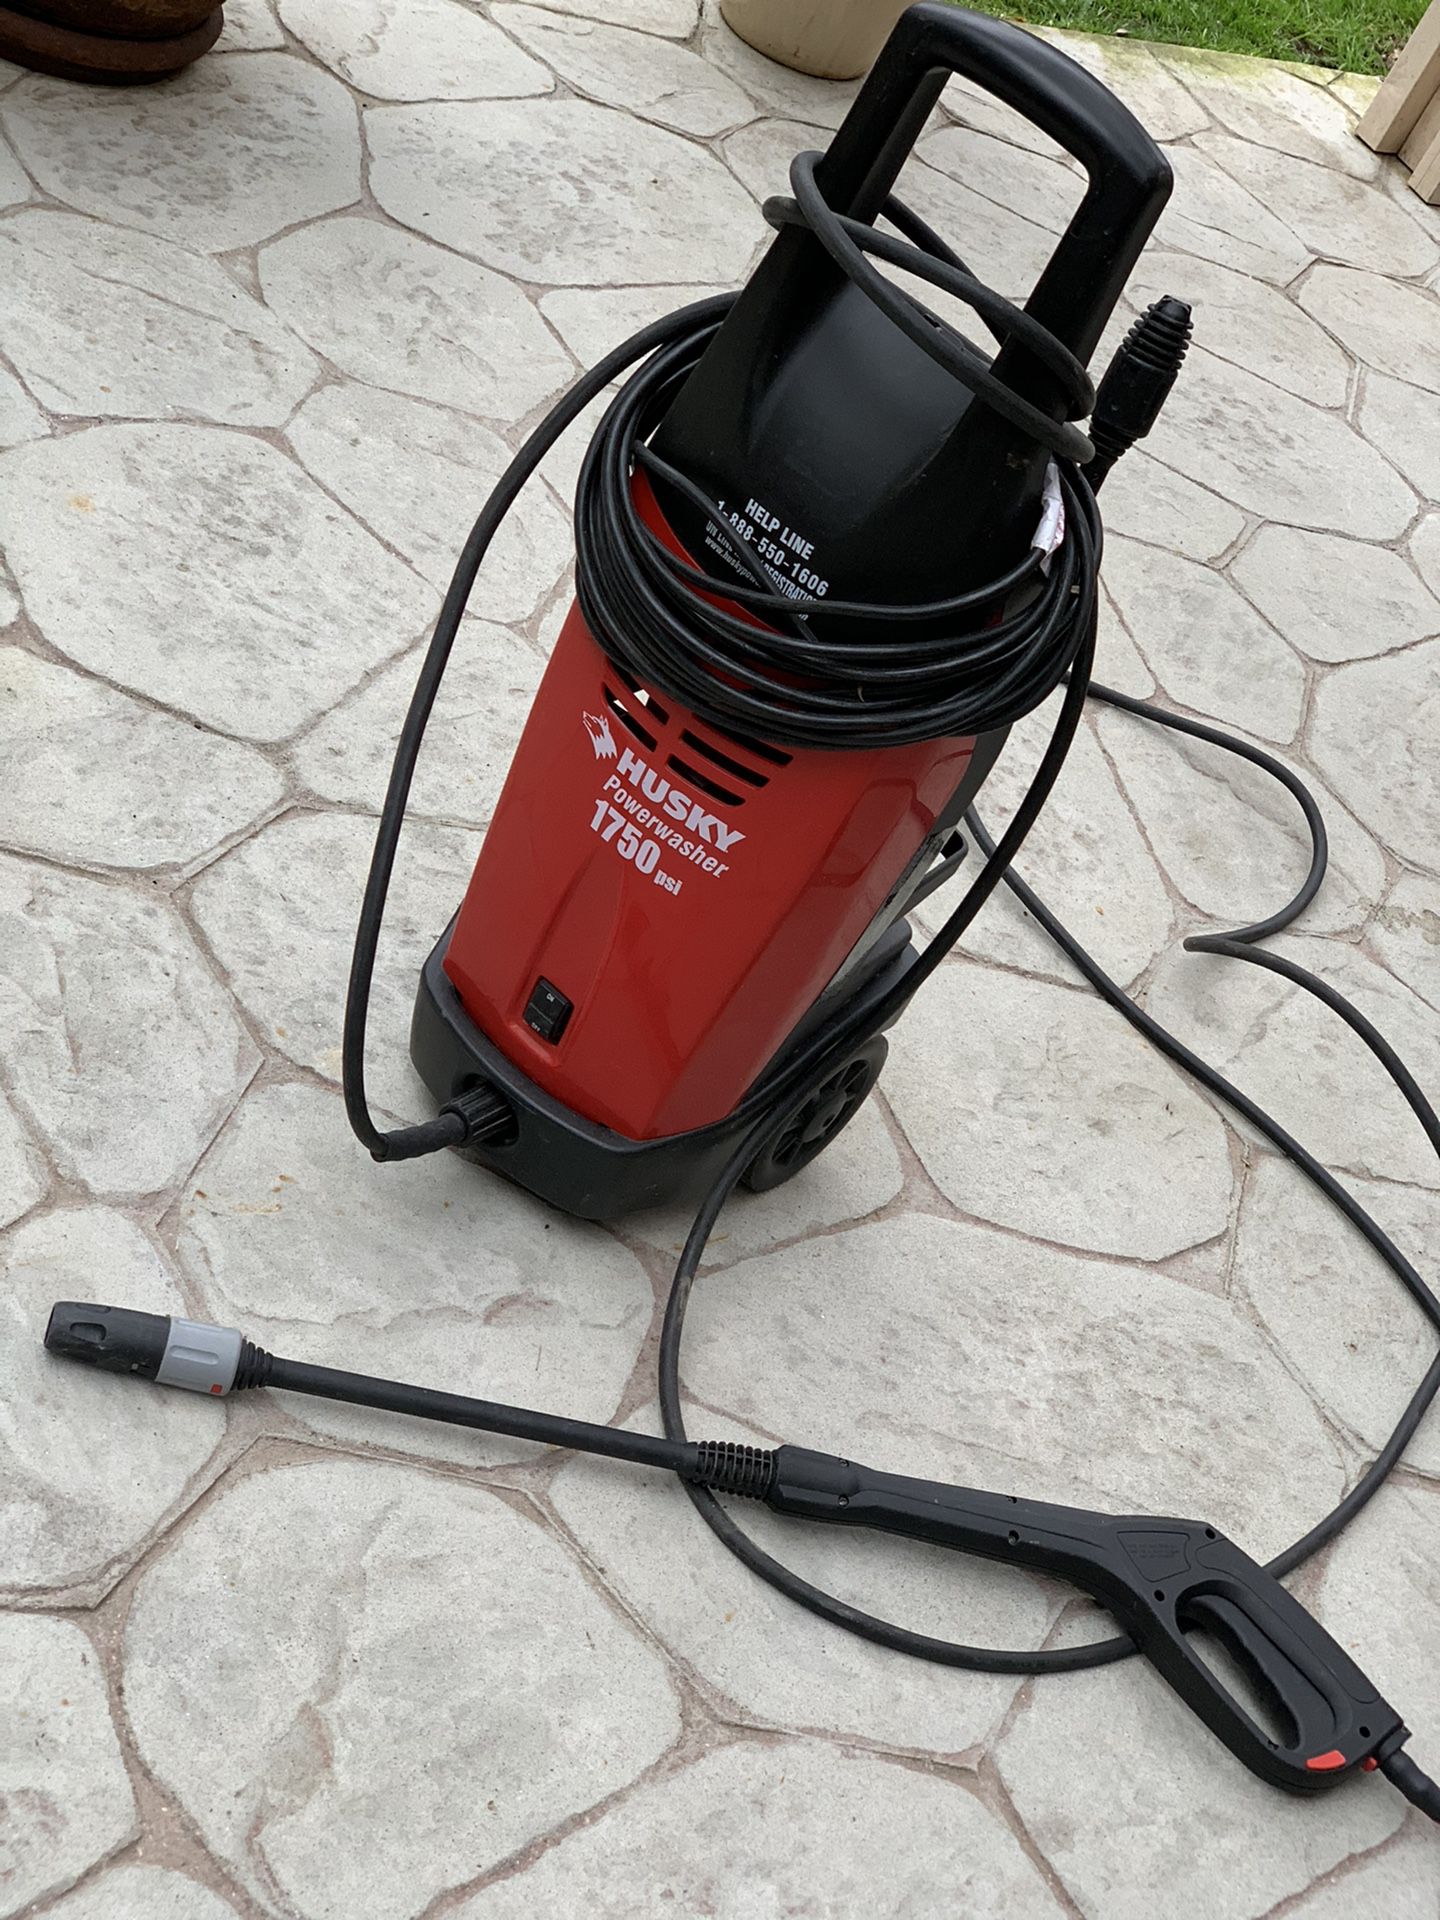 Used Husky Electric Power washer 1750 psi